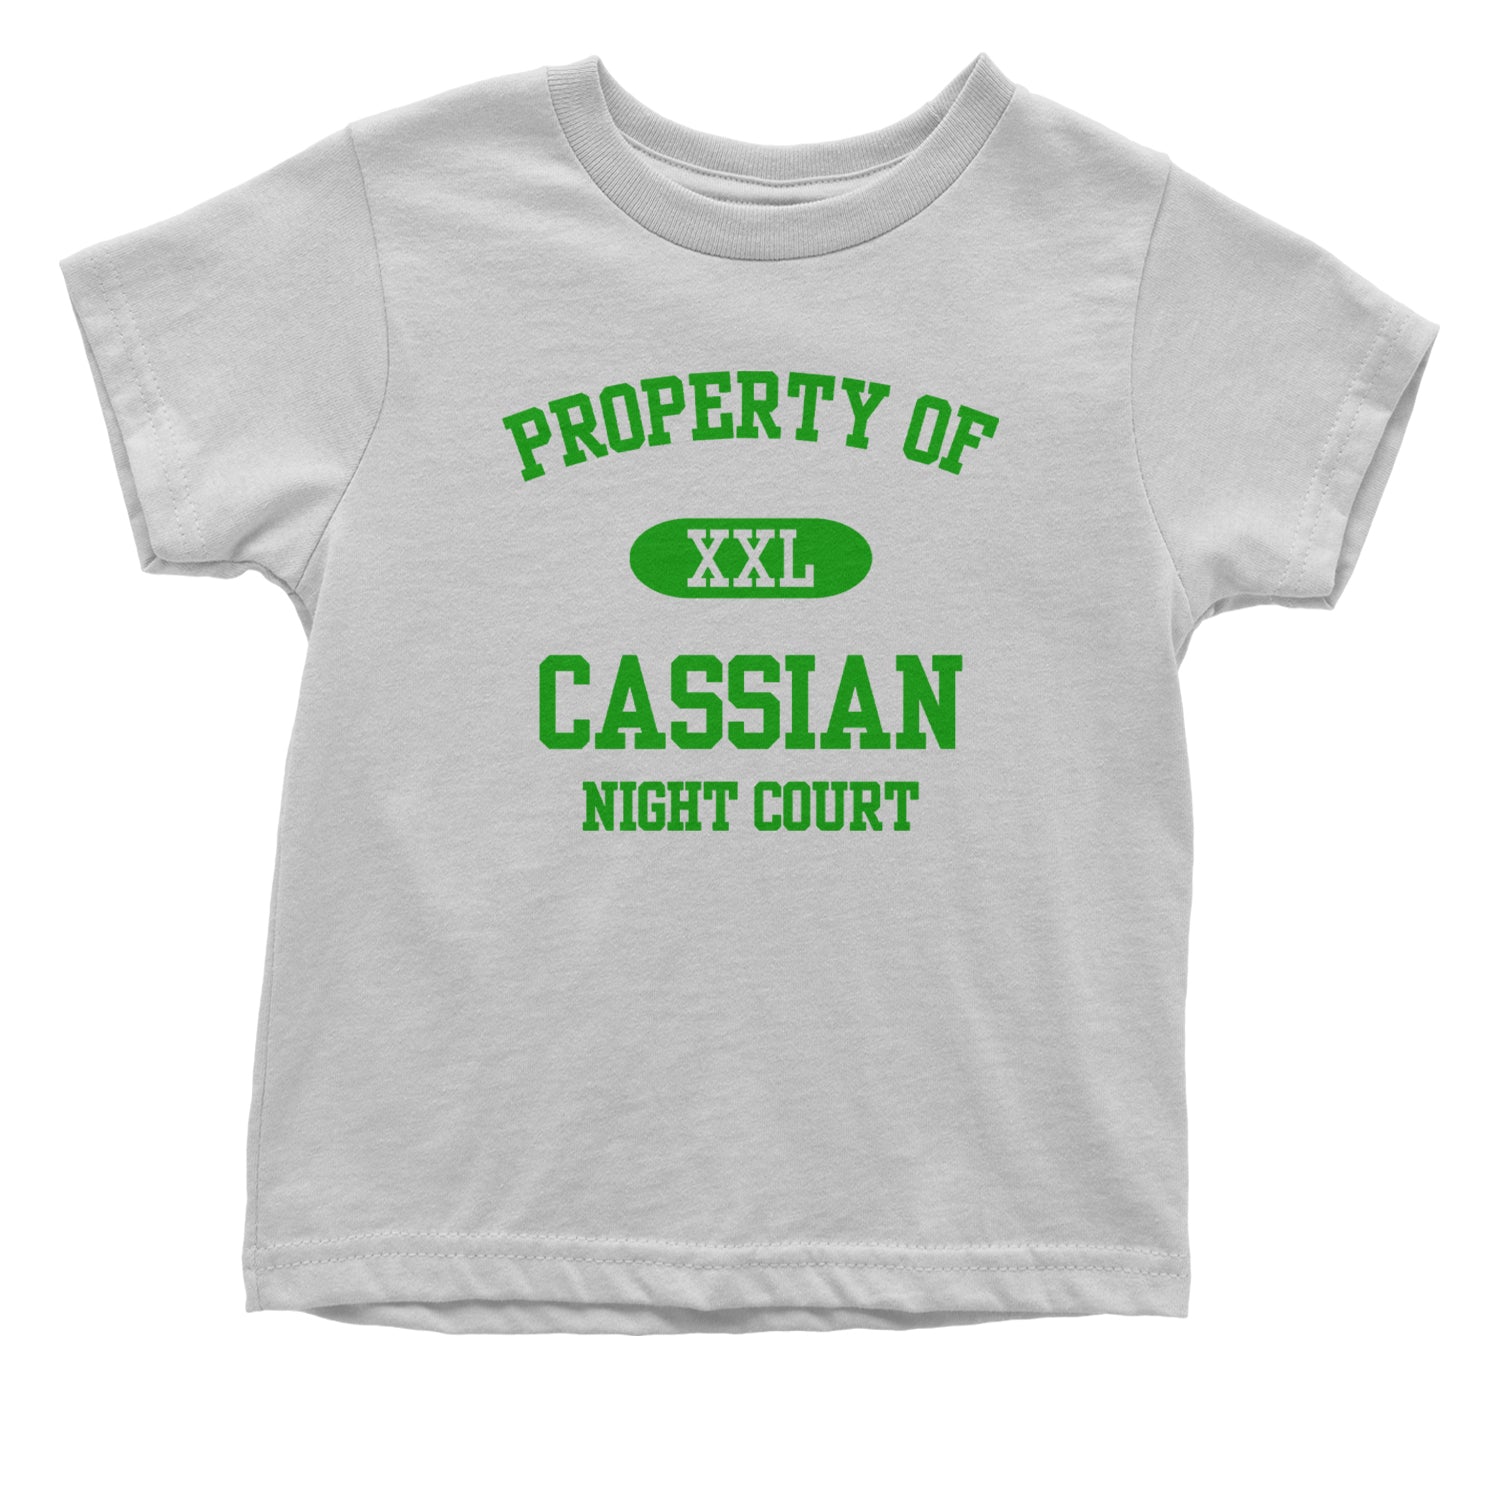 Property Of Cassian ACOTAR Infant One-Piece Romper Bodysuit and Toddler T-shirt acotar, court, maas, tamlin, thorns by Expression Tees